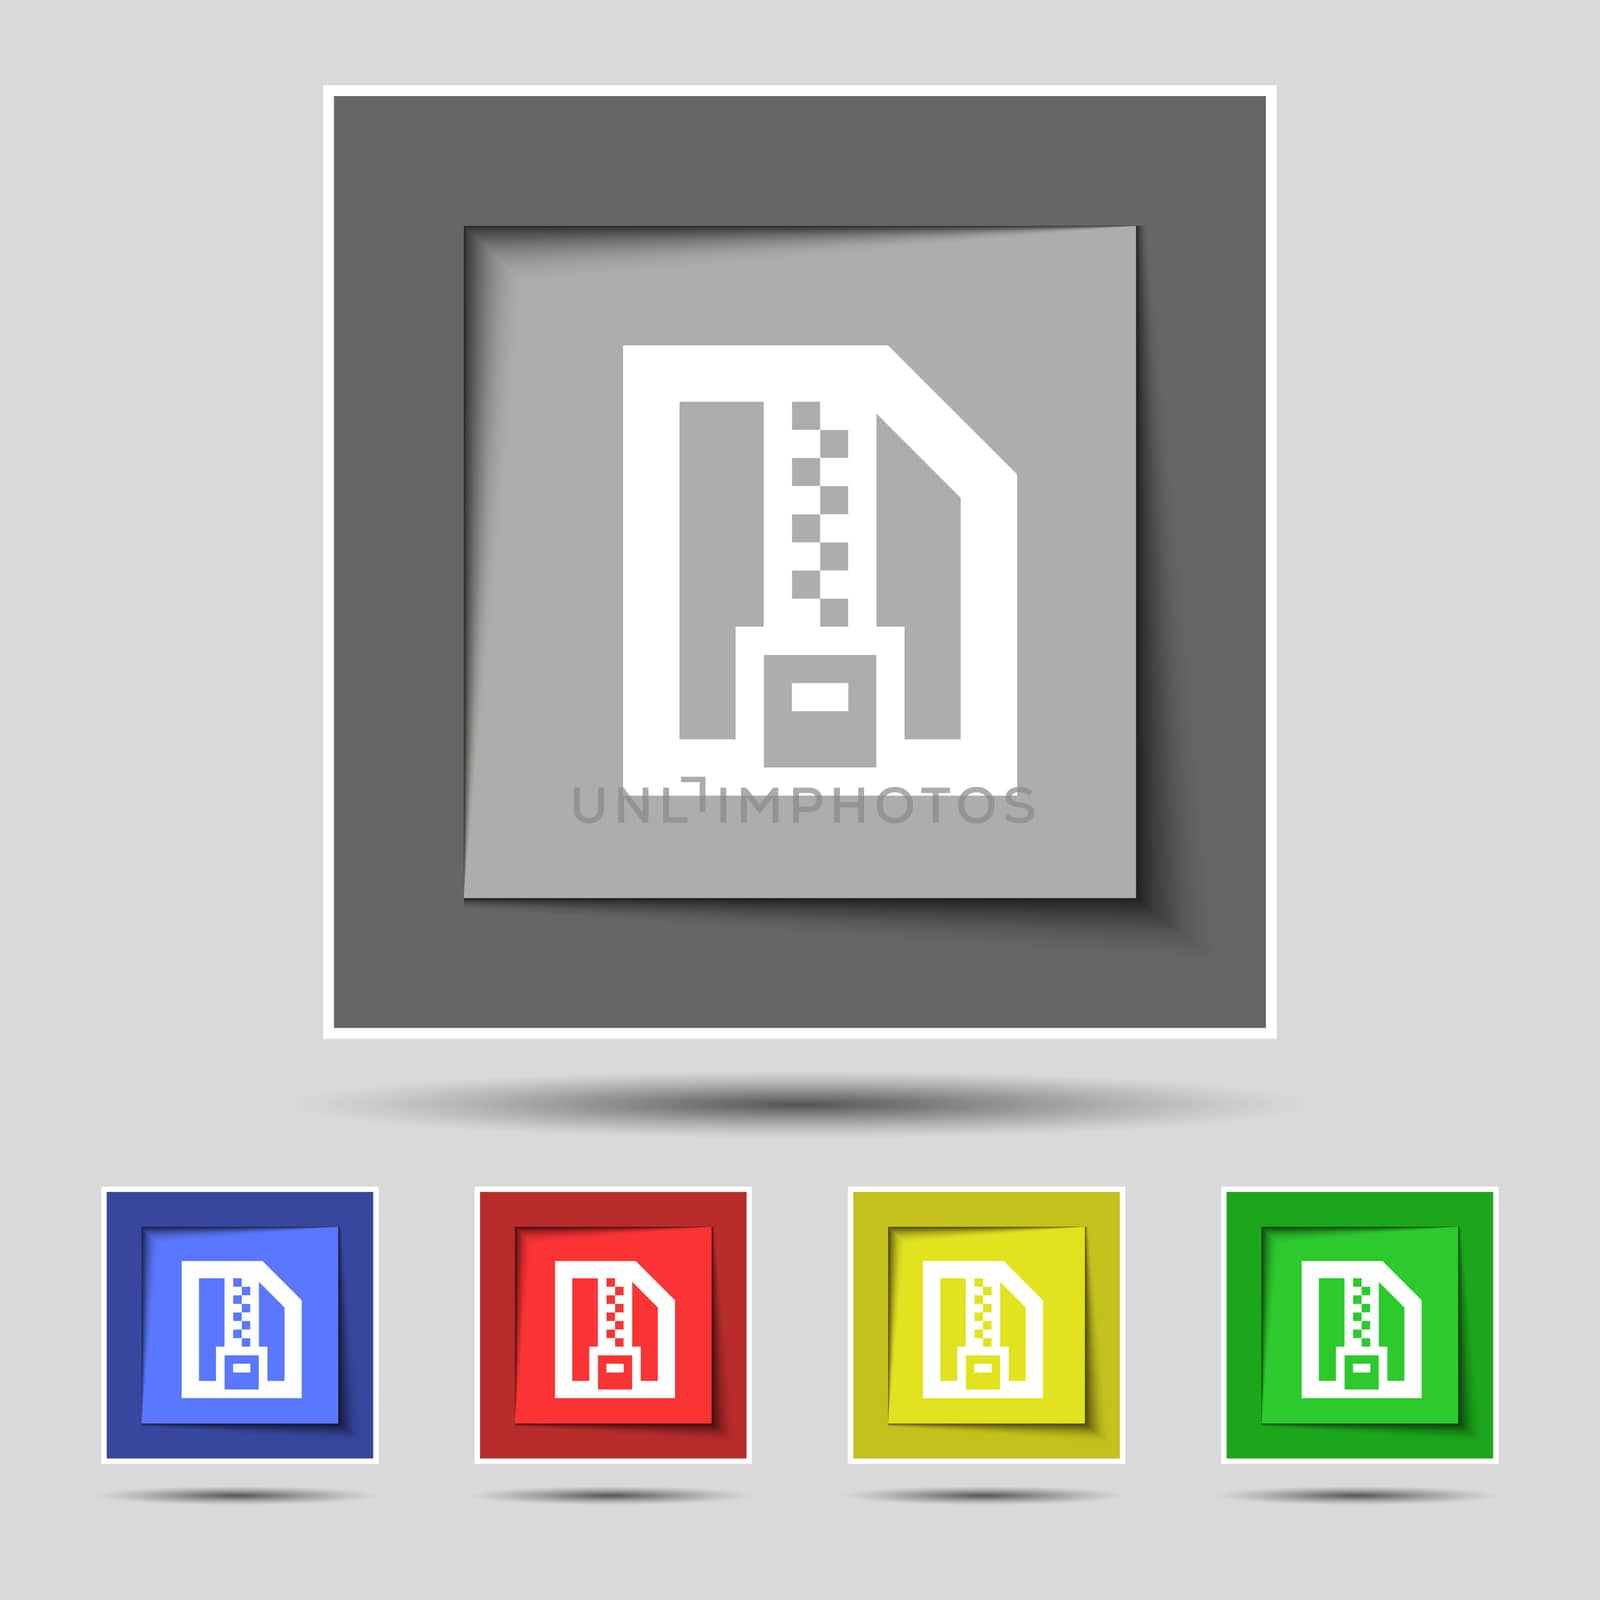 Archive file, Download compressed, ZIP zipped icon sign on the original five colored buttons. illustration